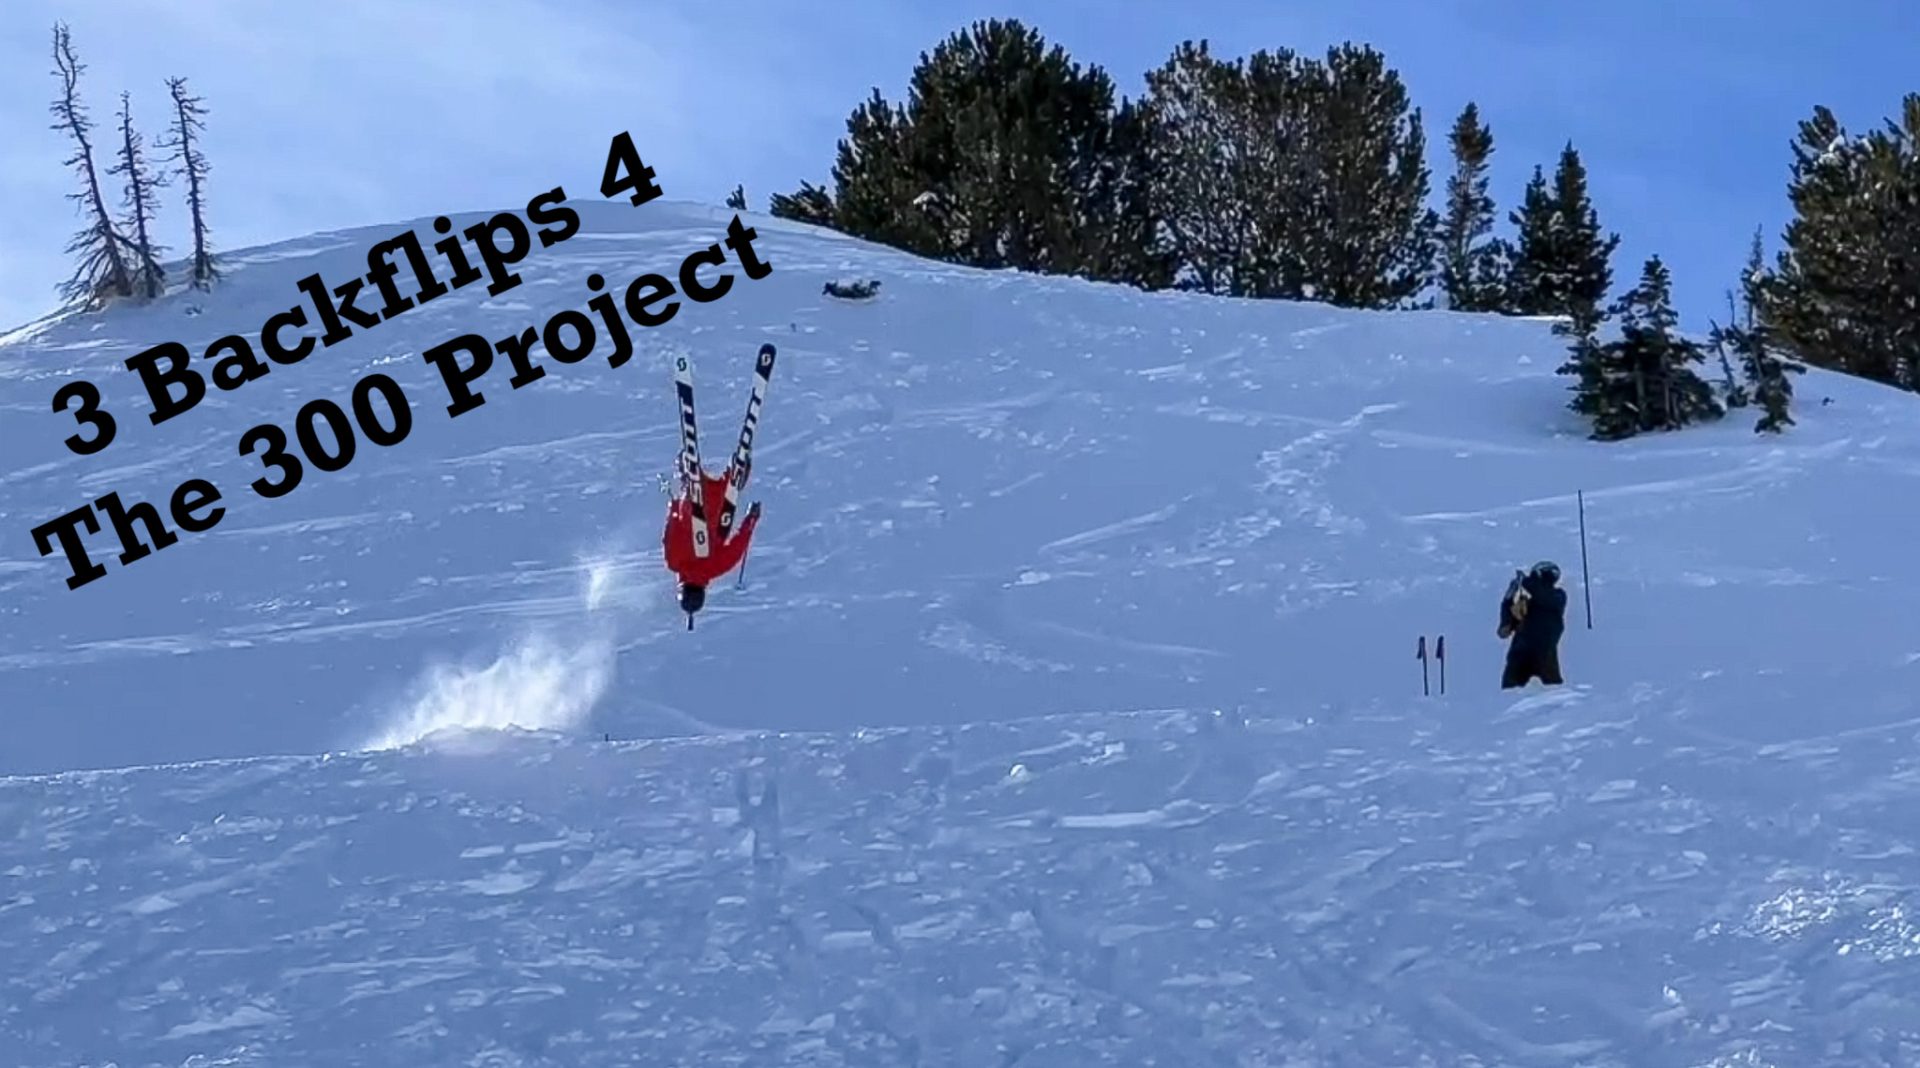 [VIDEO] 3 Backflips in Utah For The End of the “300” Project – SnowBrains